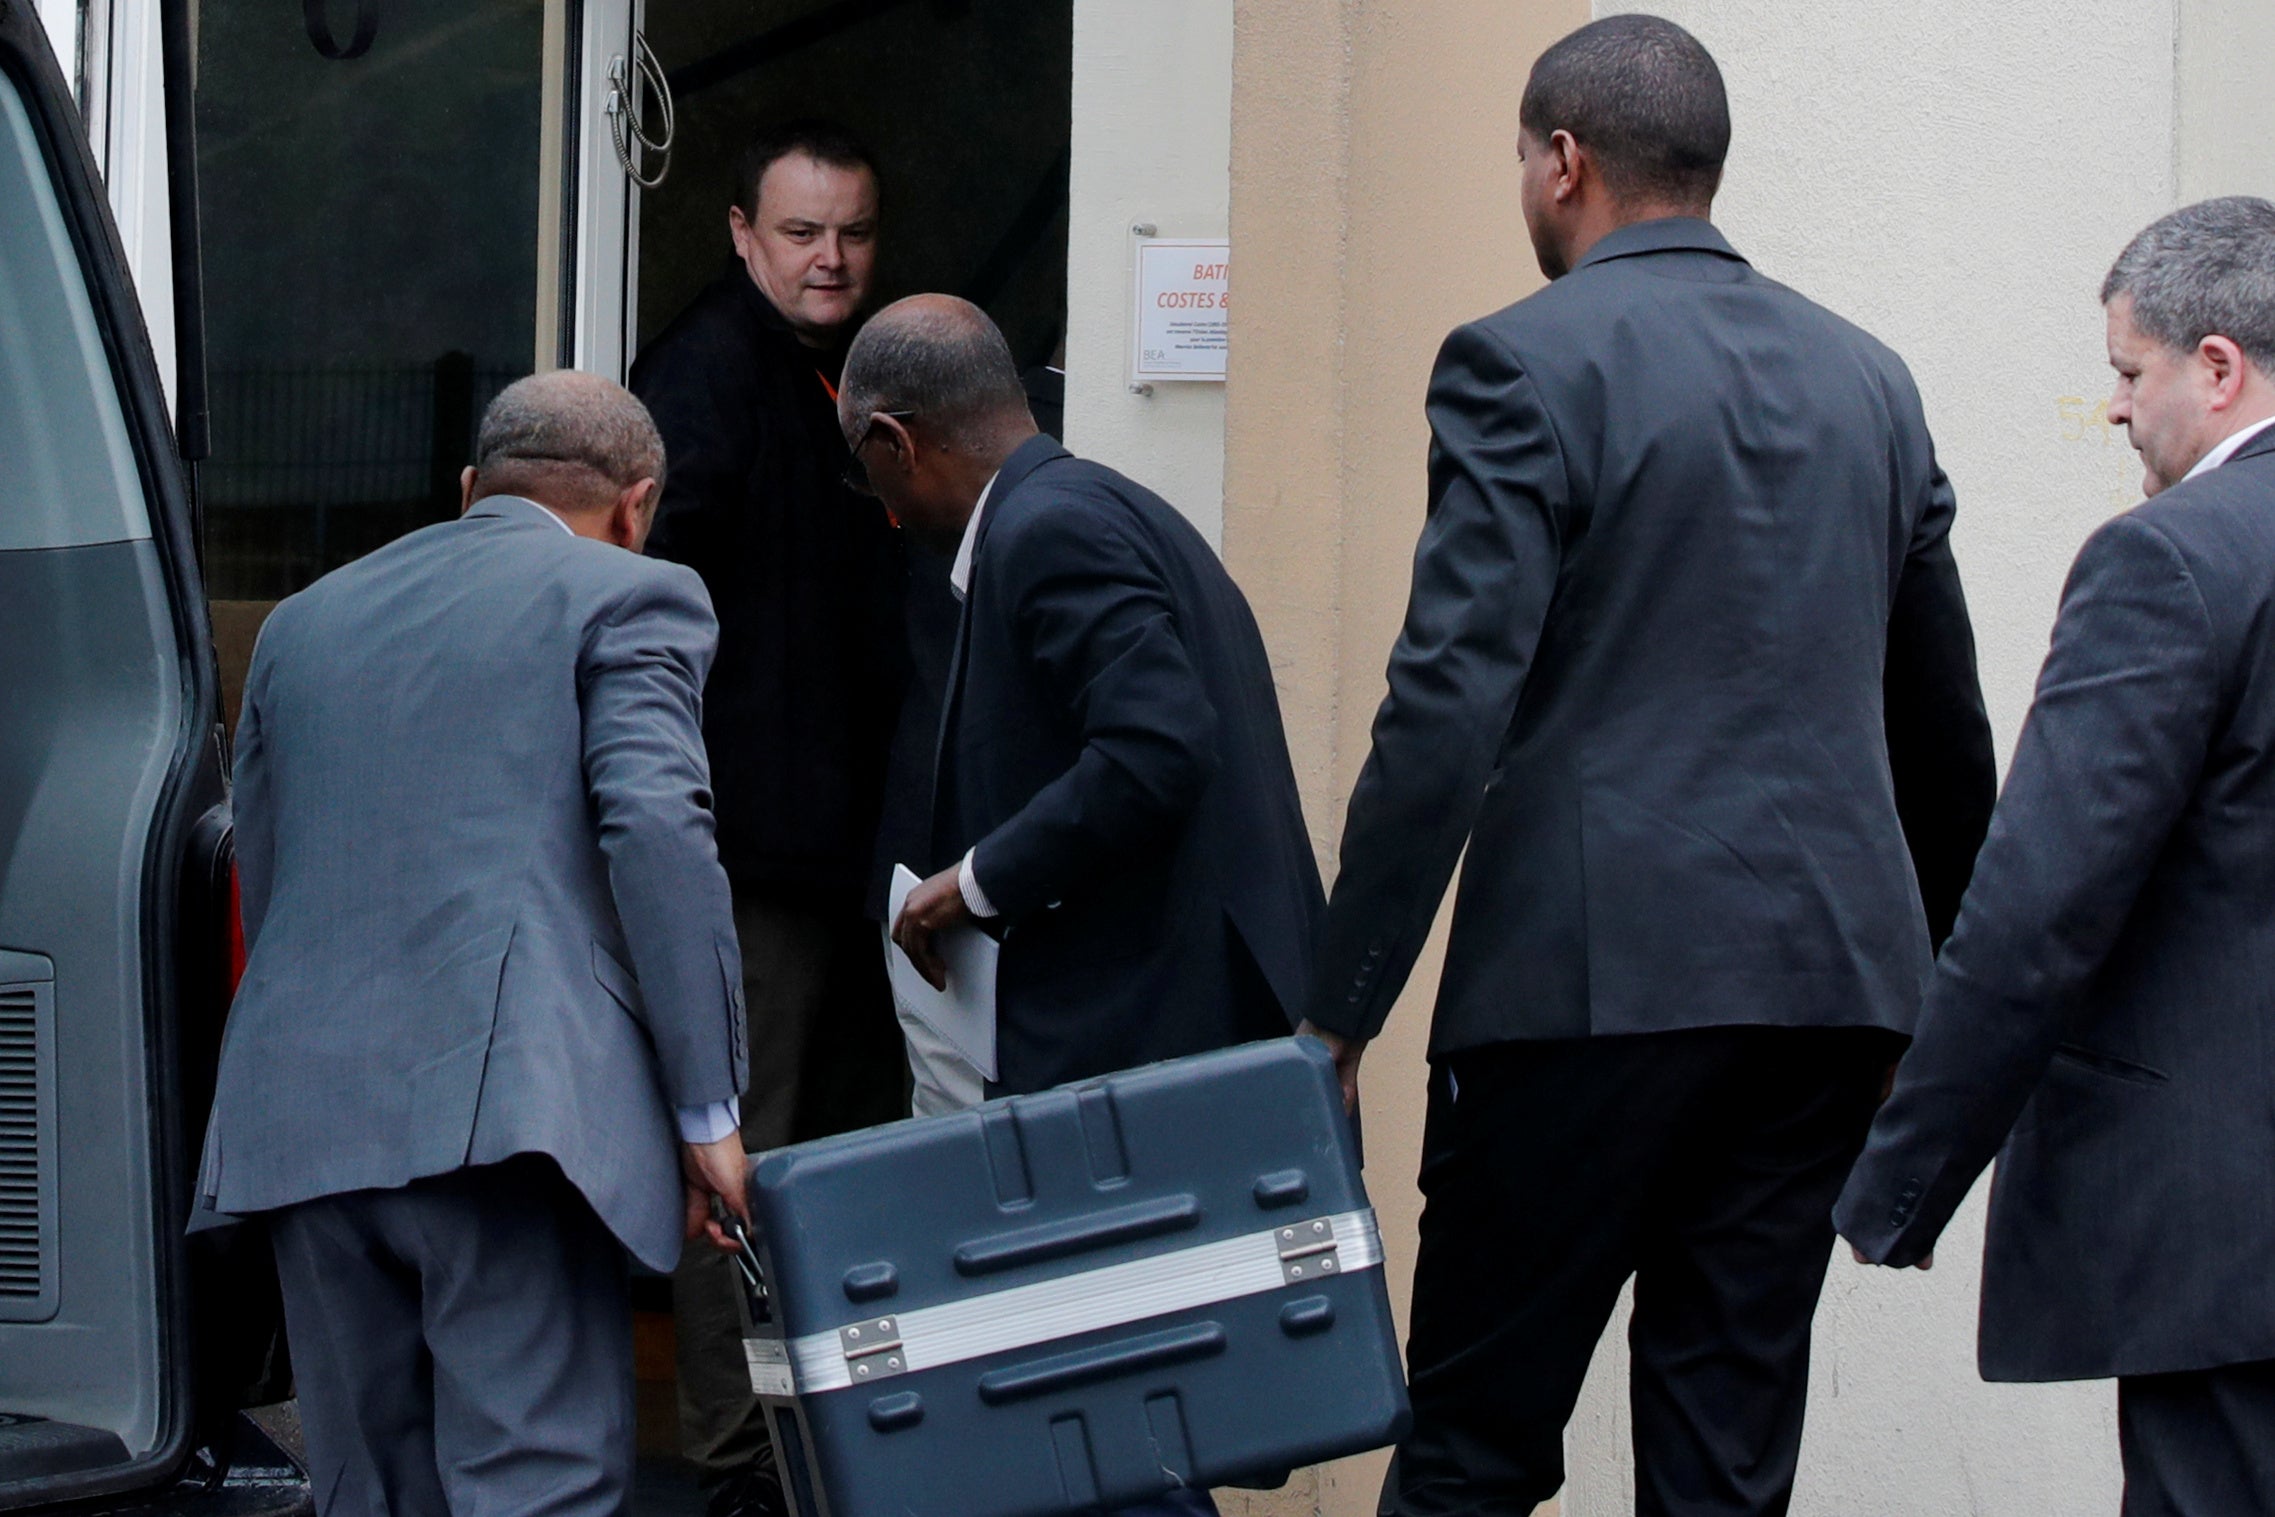 Men unload a case containing the black boxes from an SUV